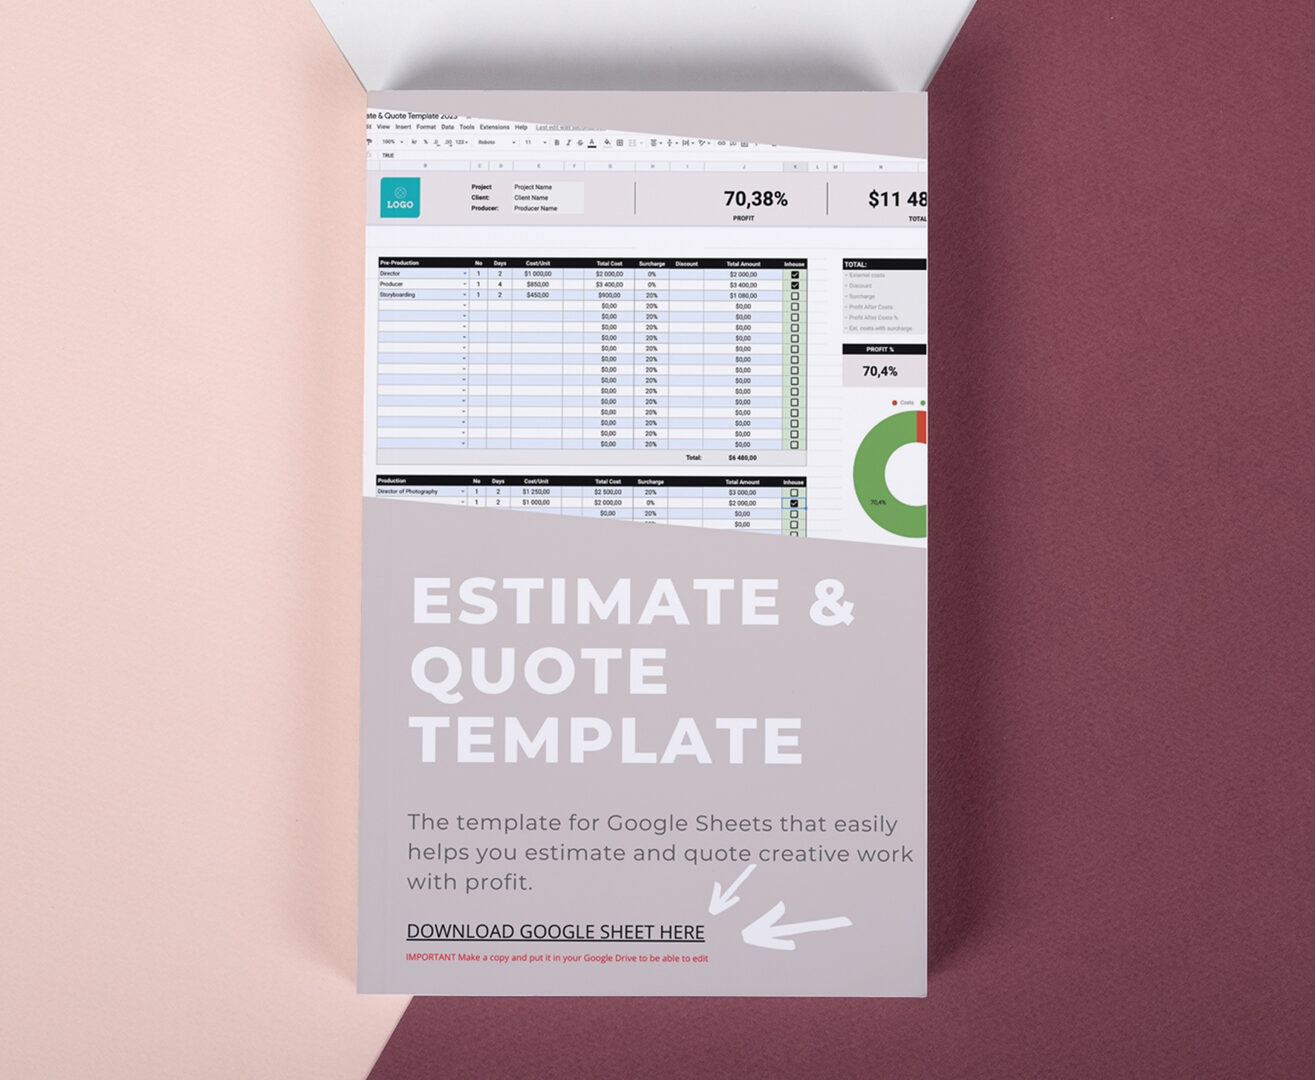 Estimate & Quote Google Sheets Template for Creative Businesses, Video Production Companies and more.